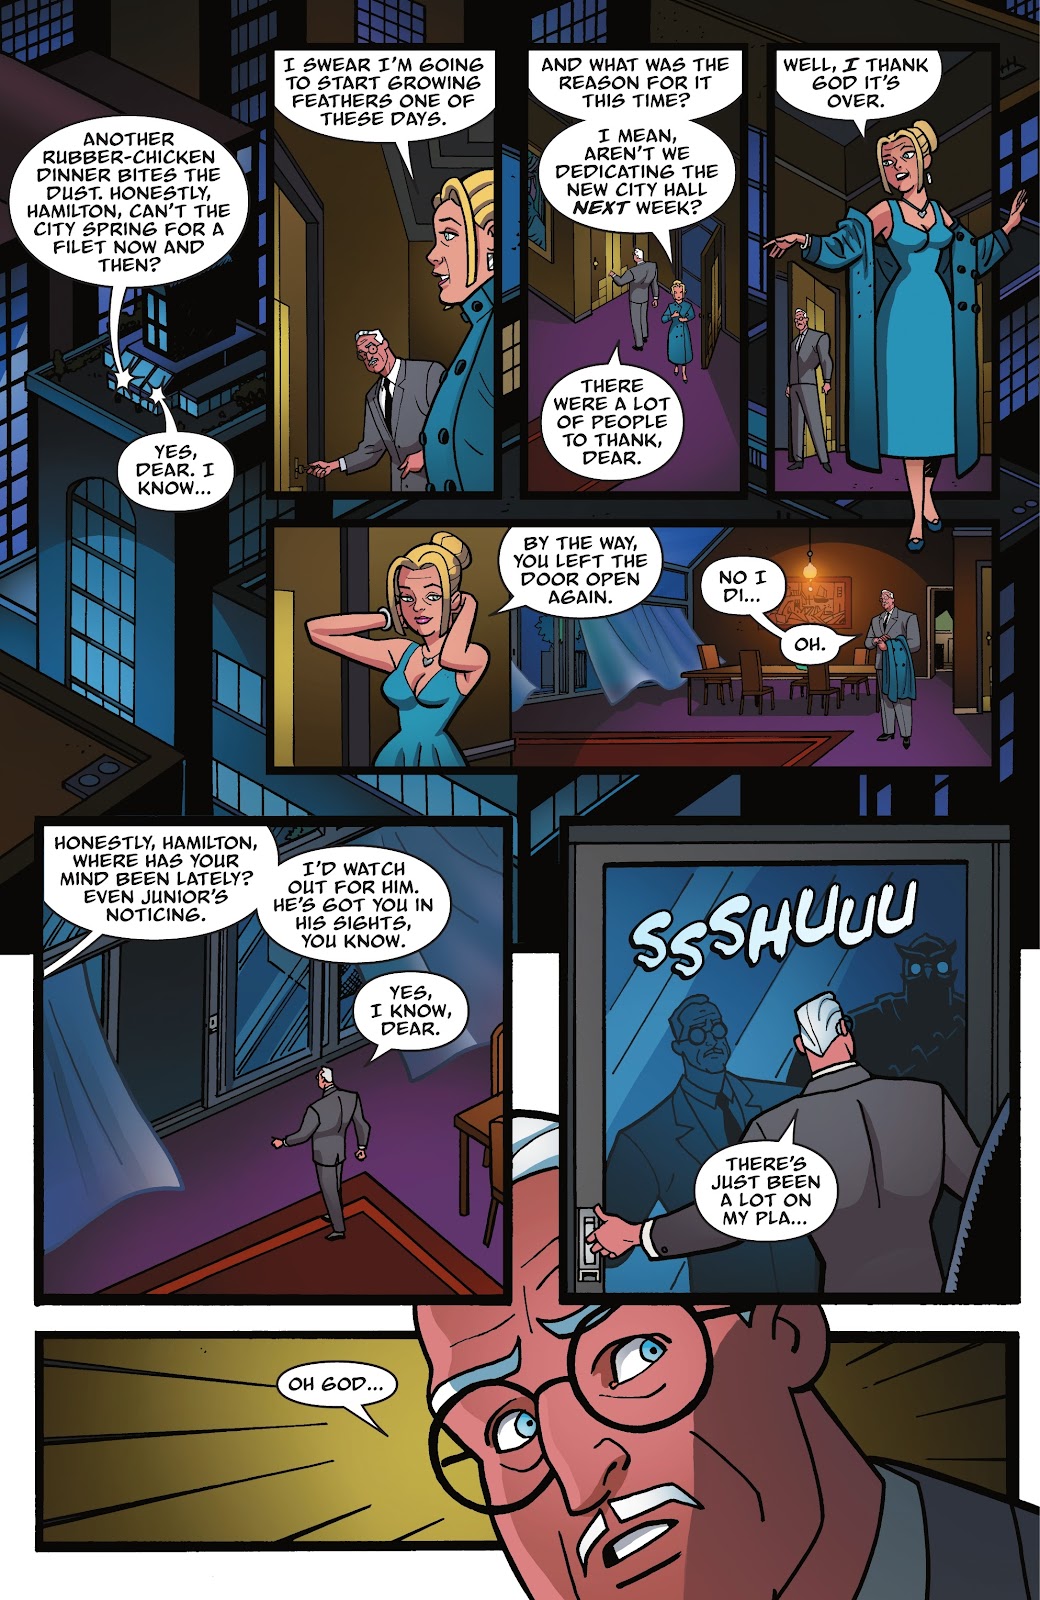 Batman: The Adventures Continue: Season Two issue 1 - Page 3